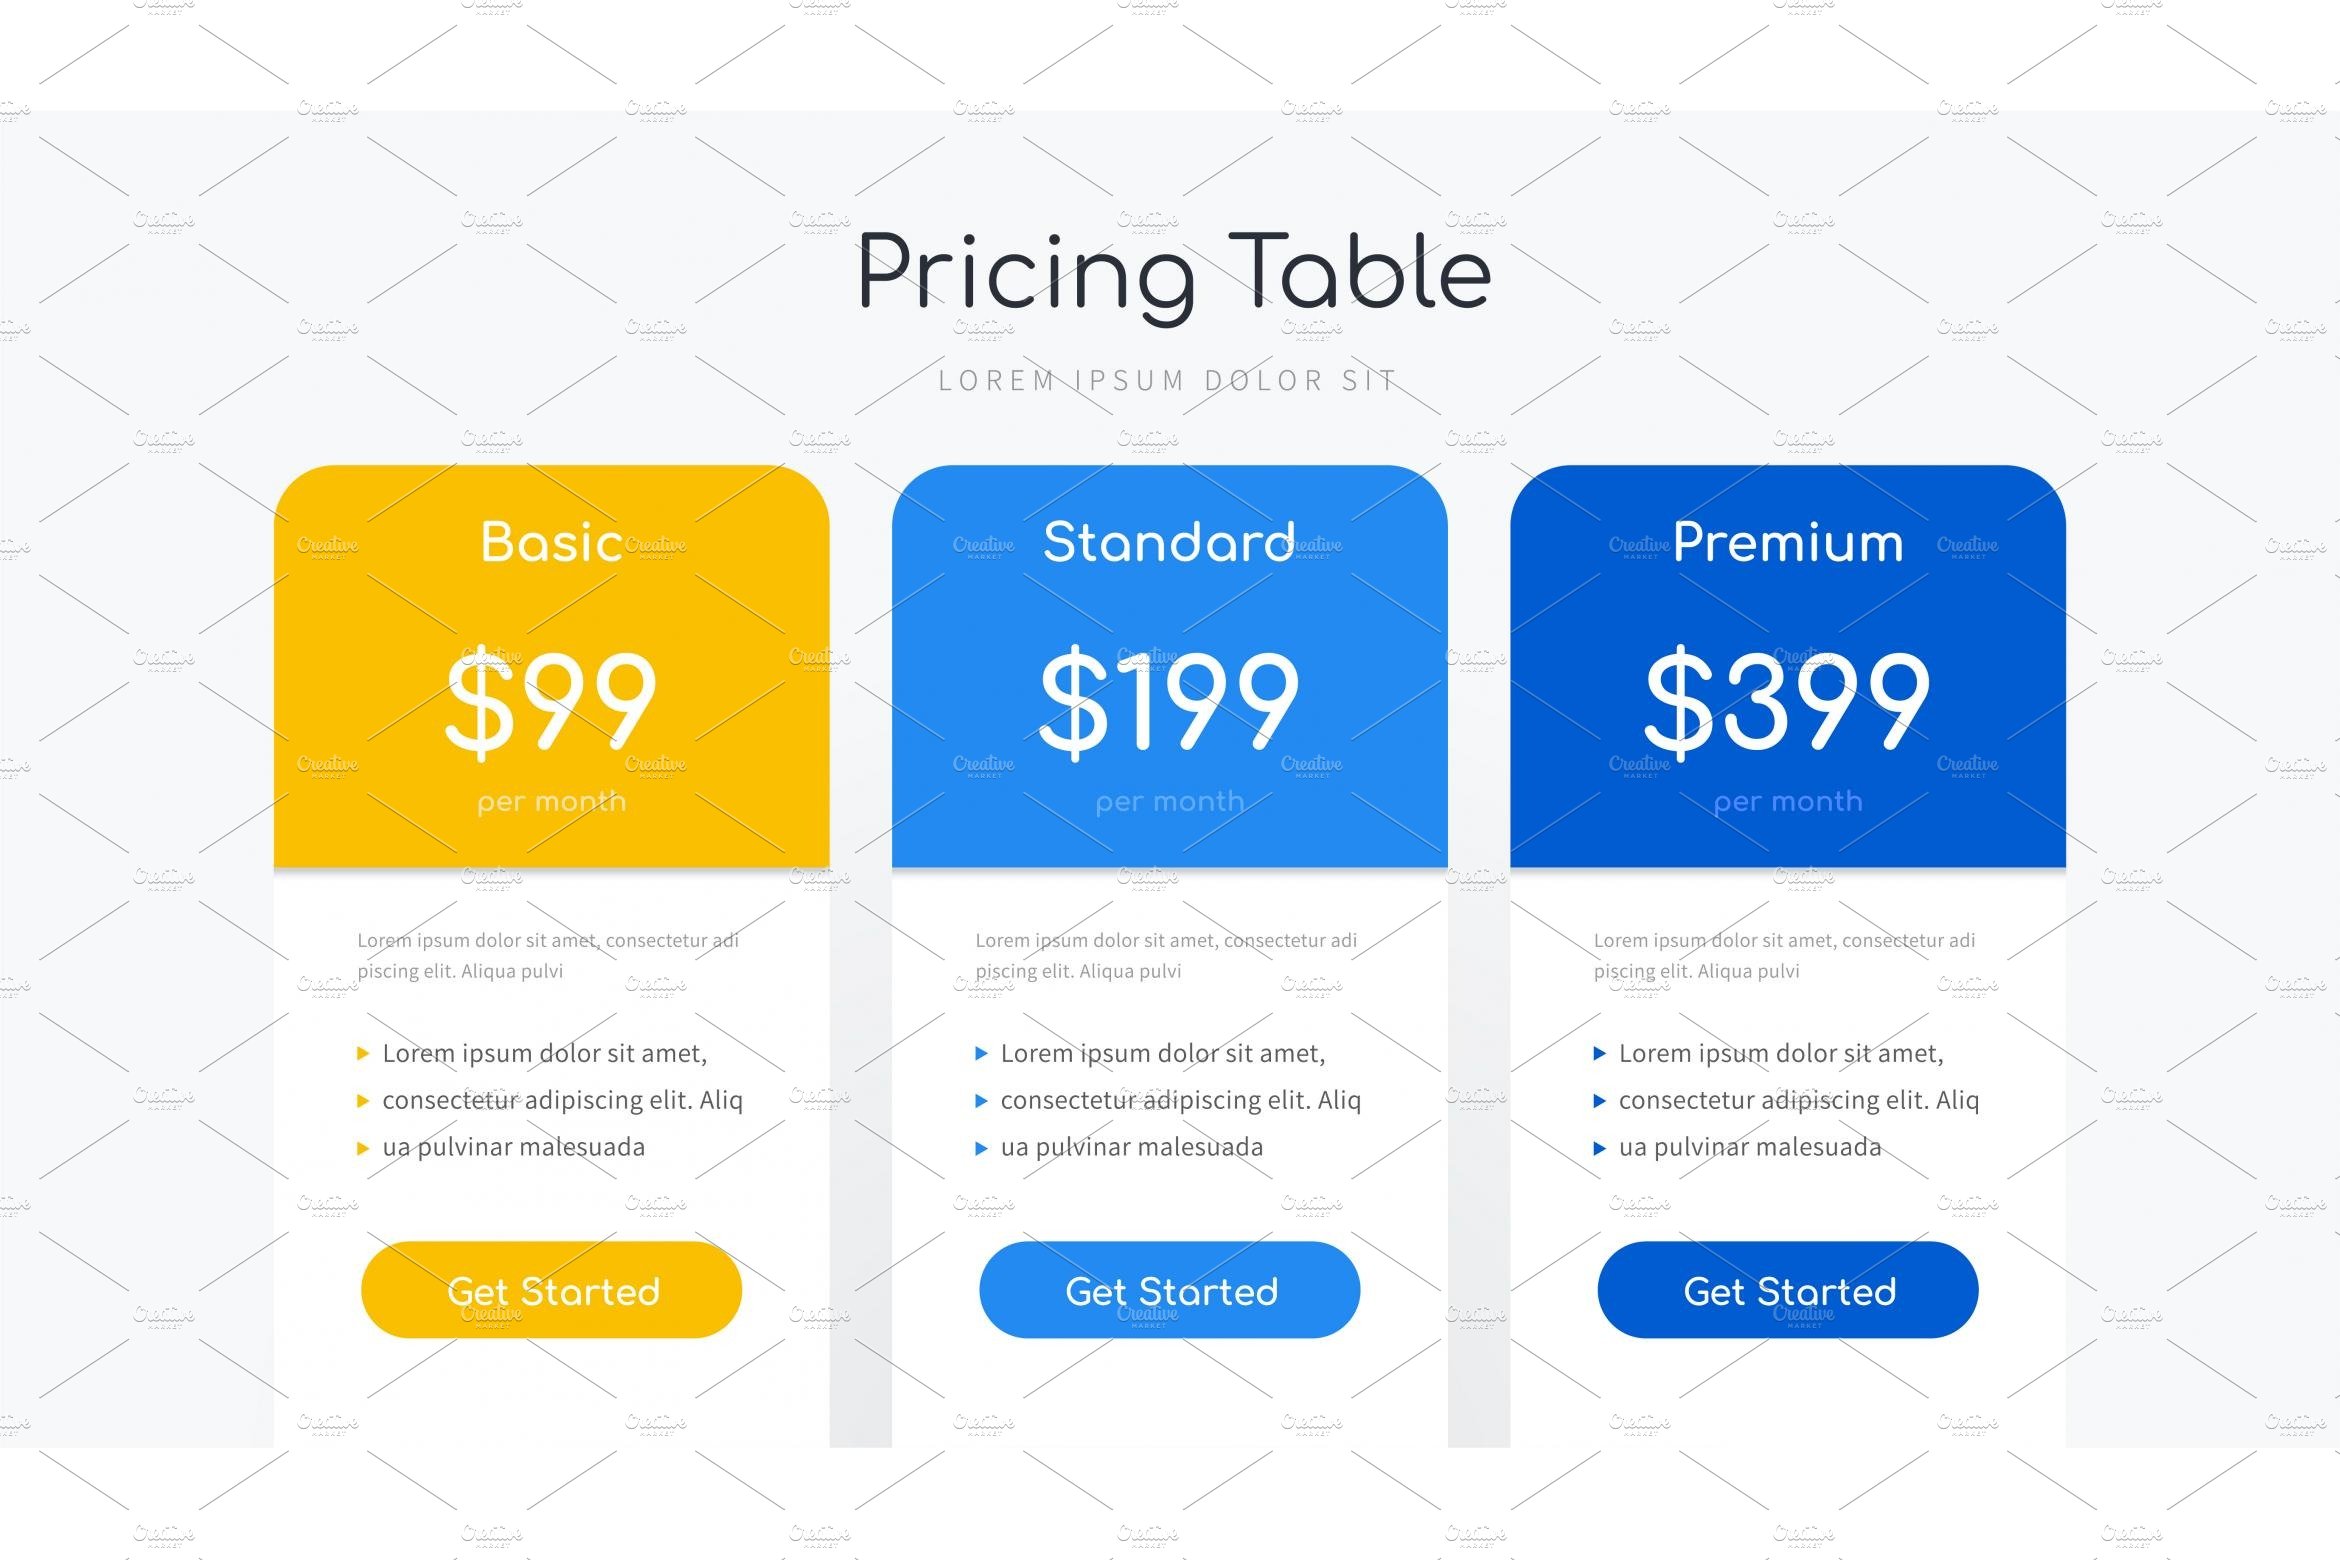 Pricing table infographic design cover image.